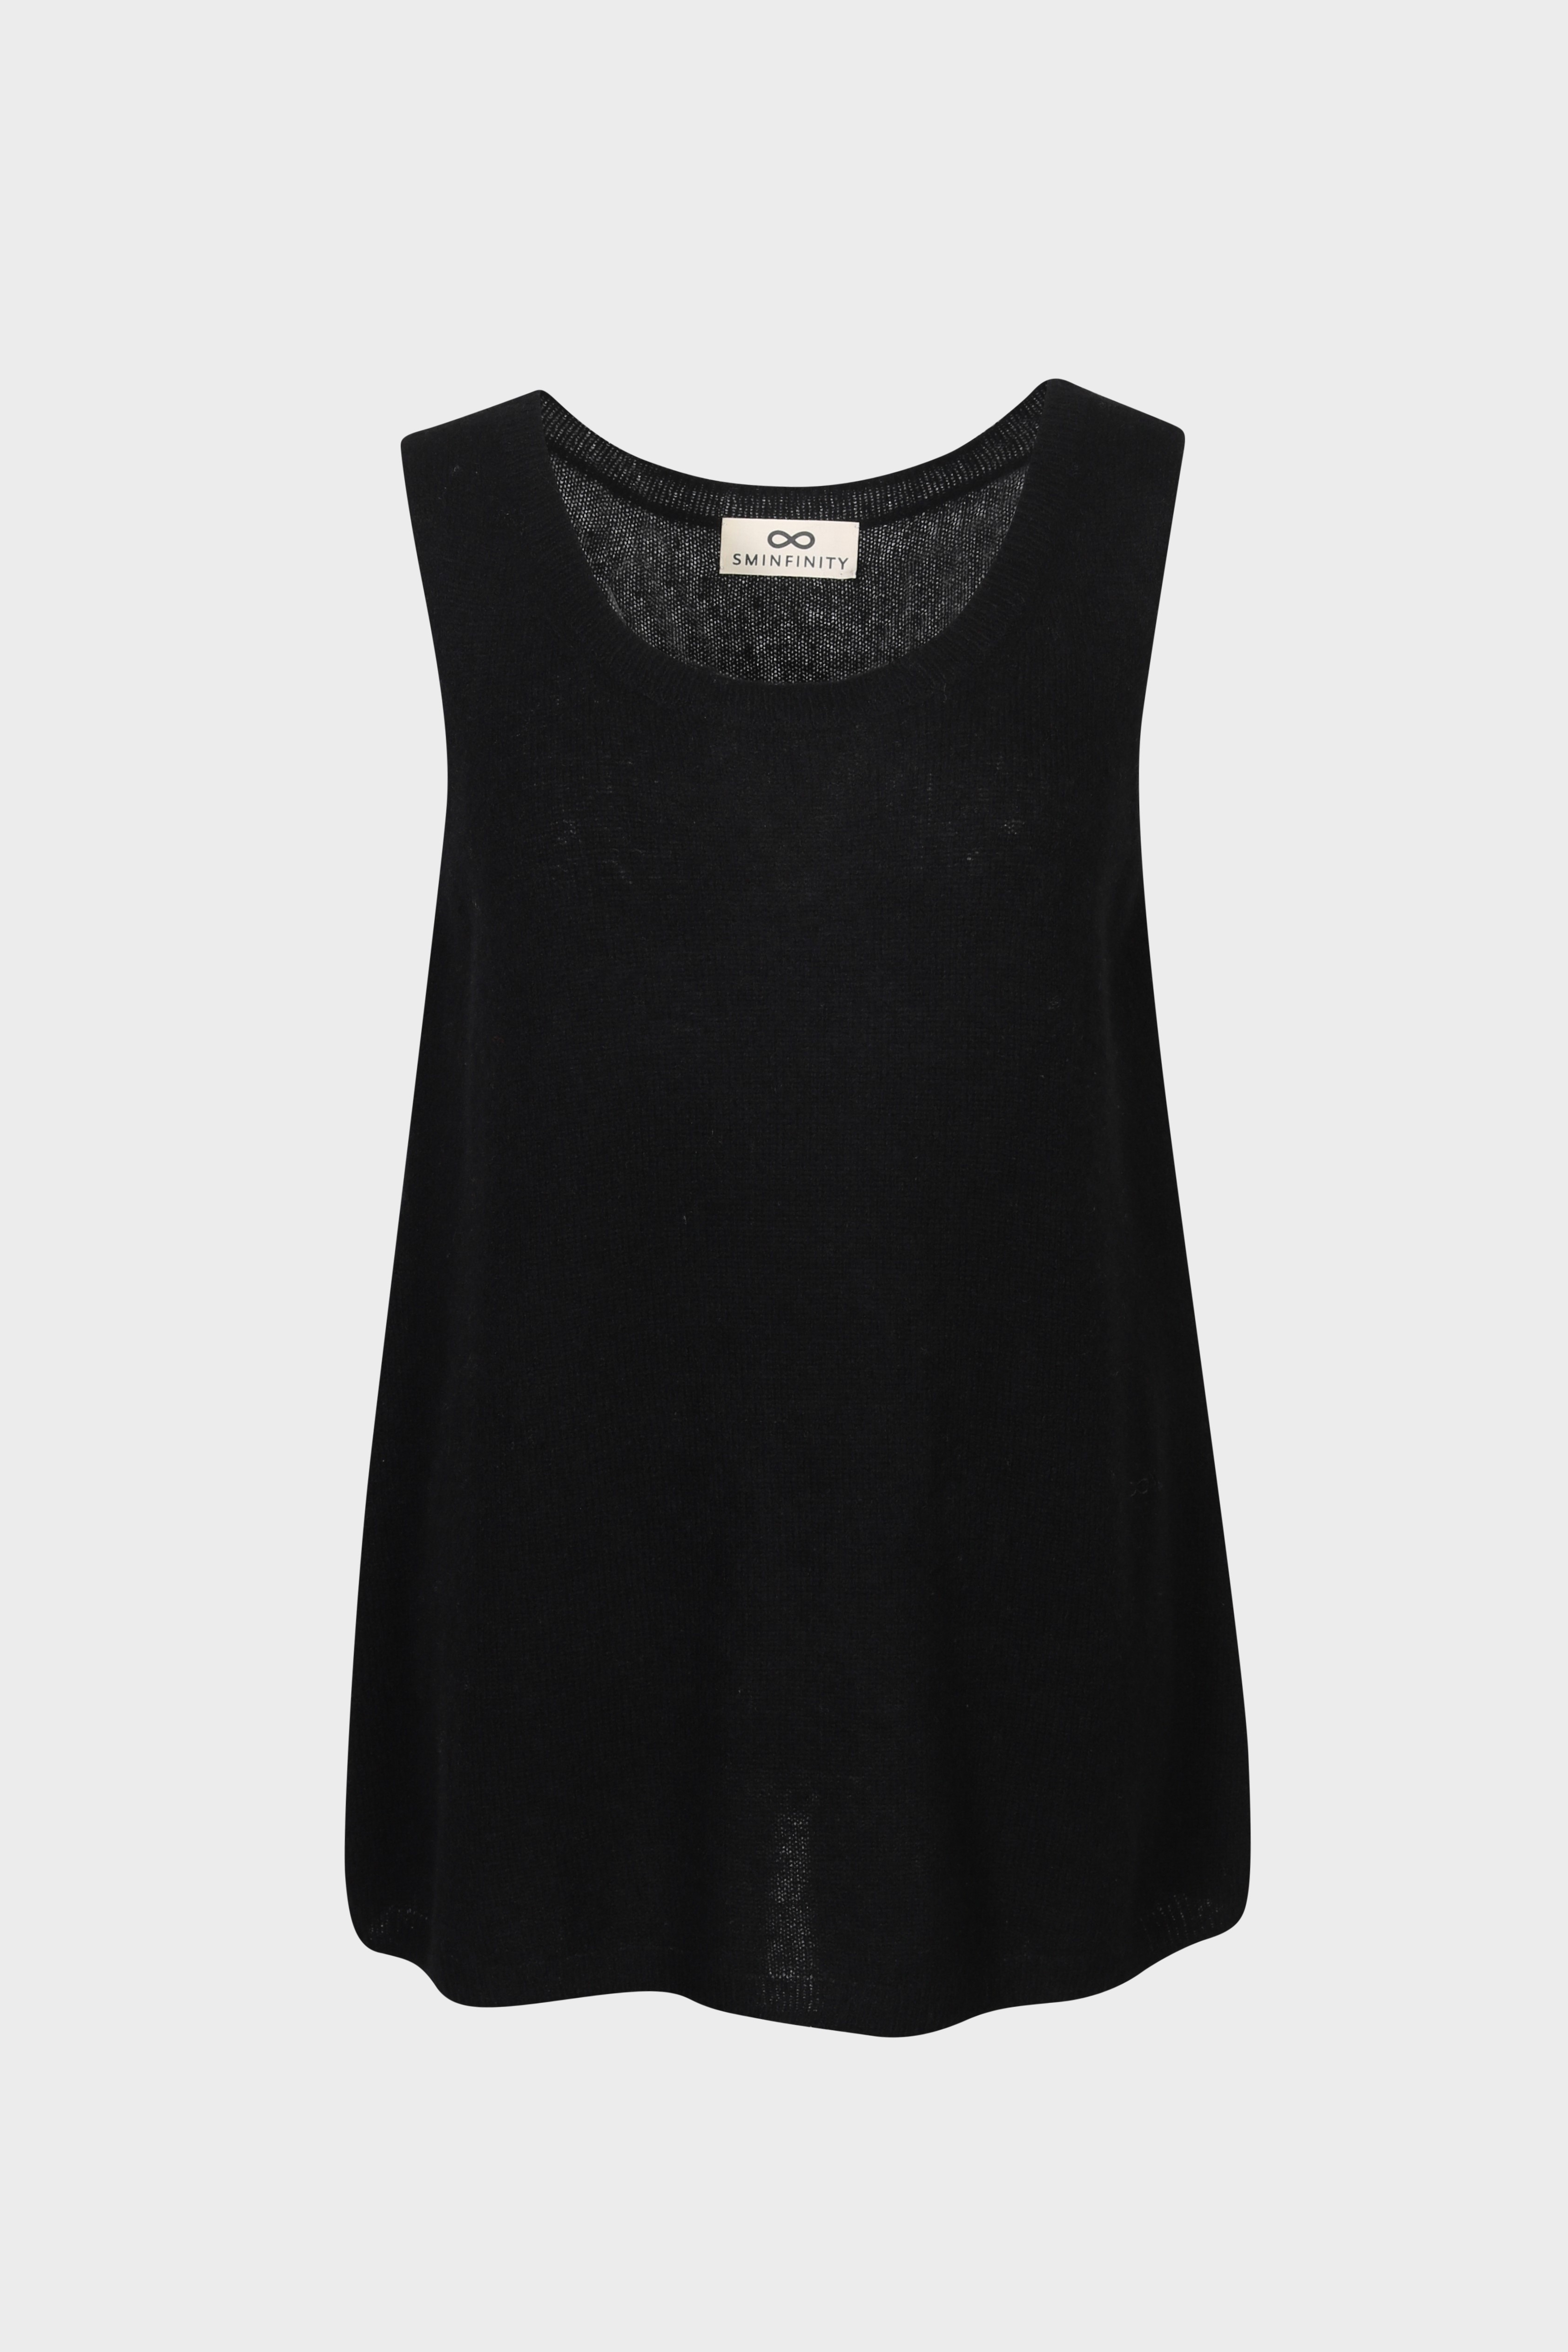 SMINFINITY Blurry Knit Top in Black XS/S